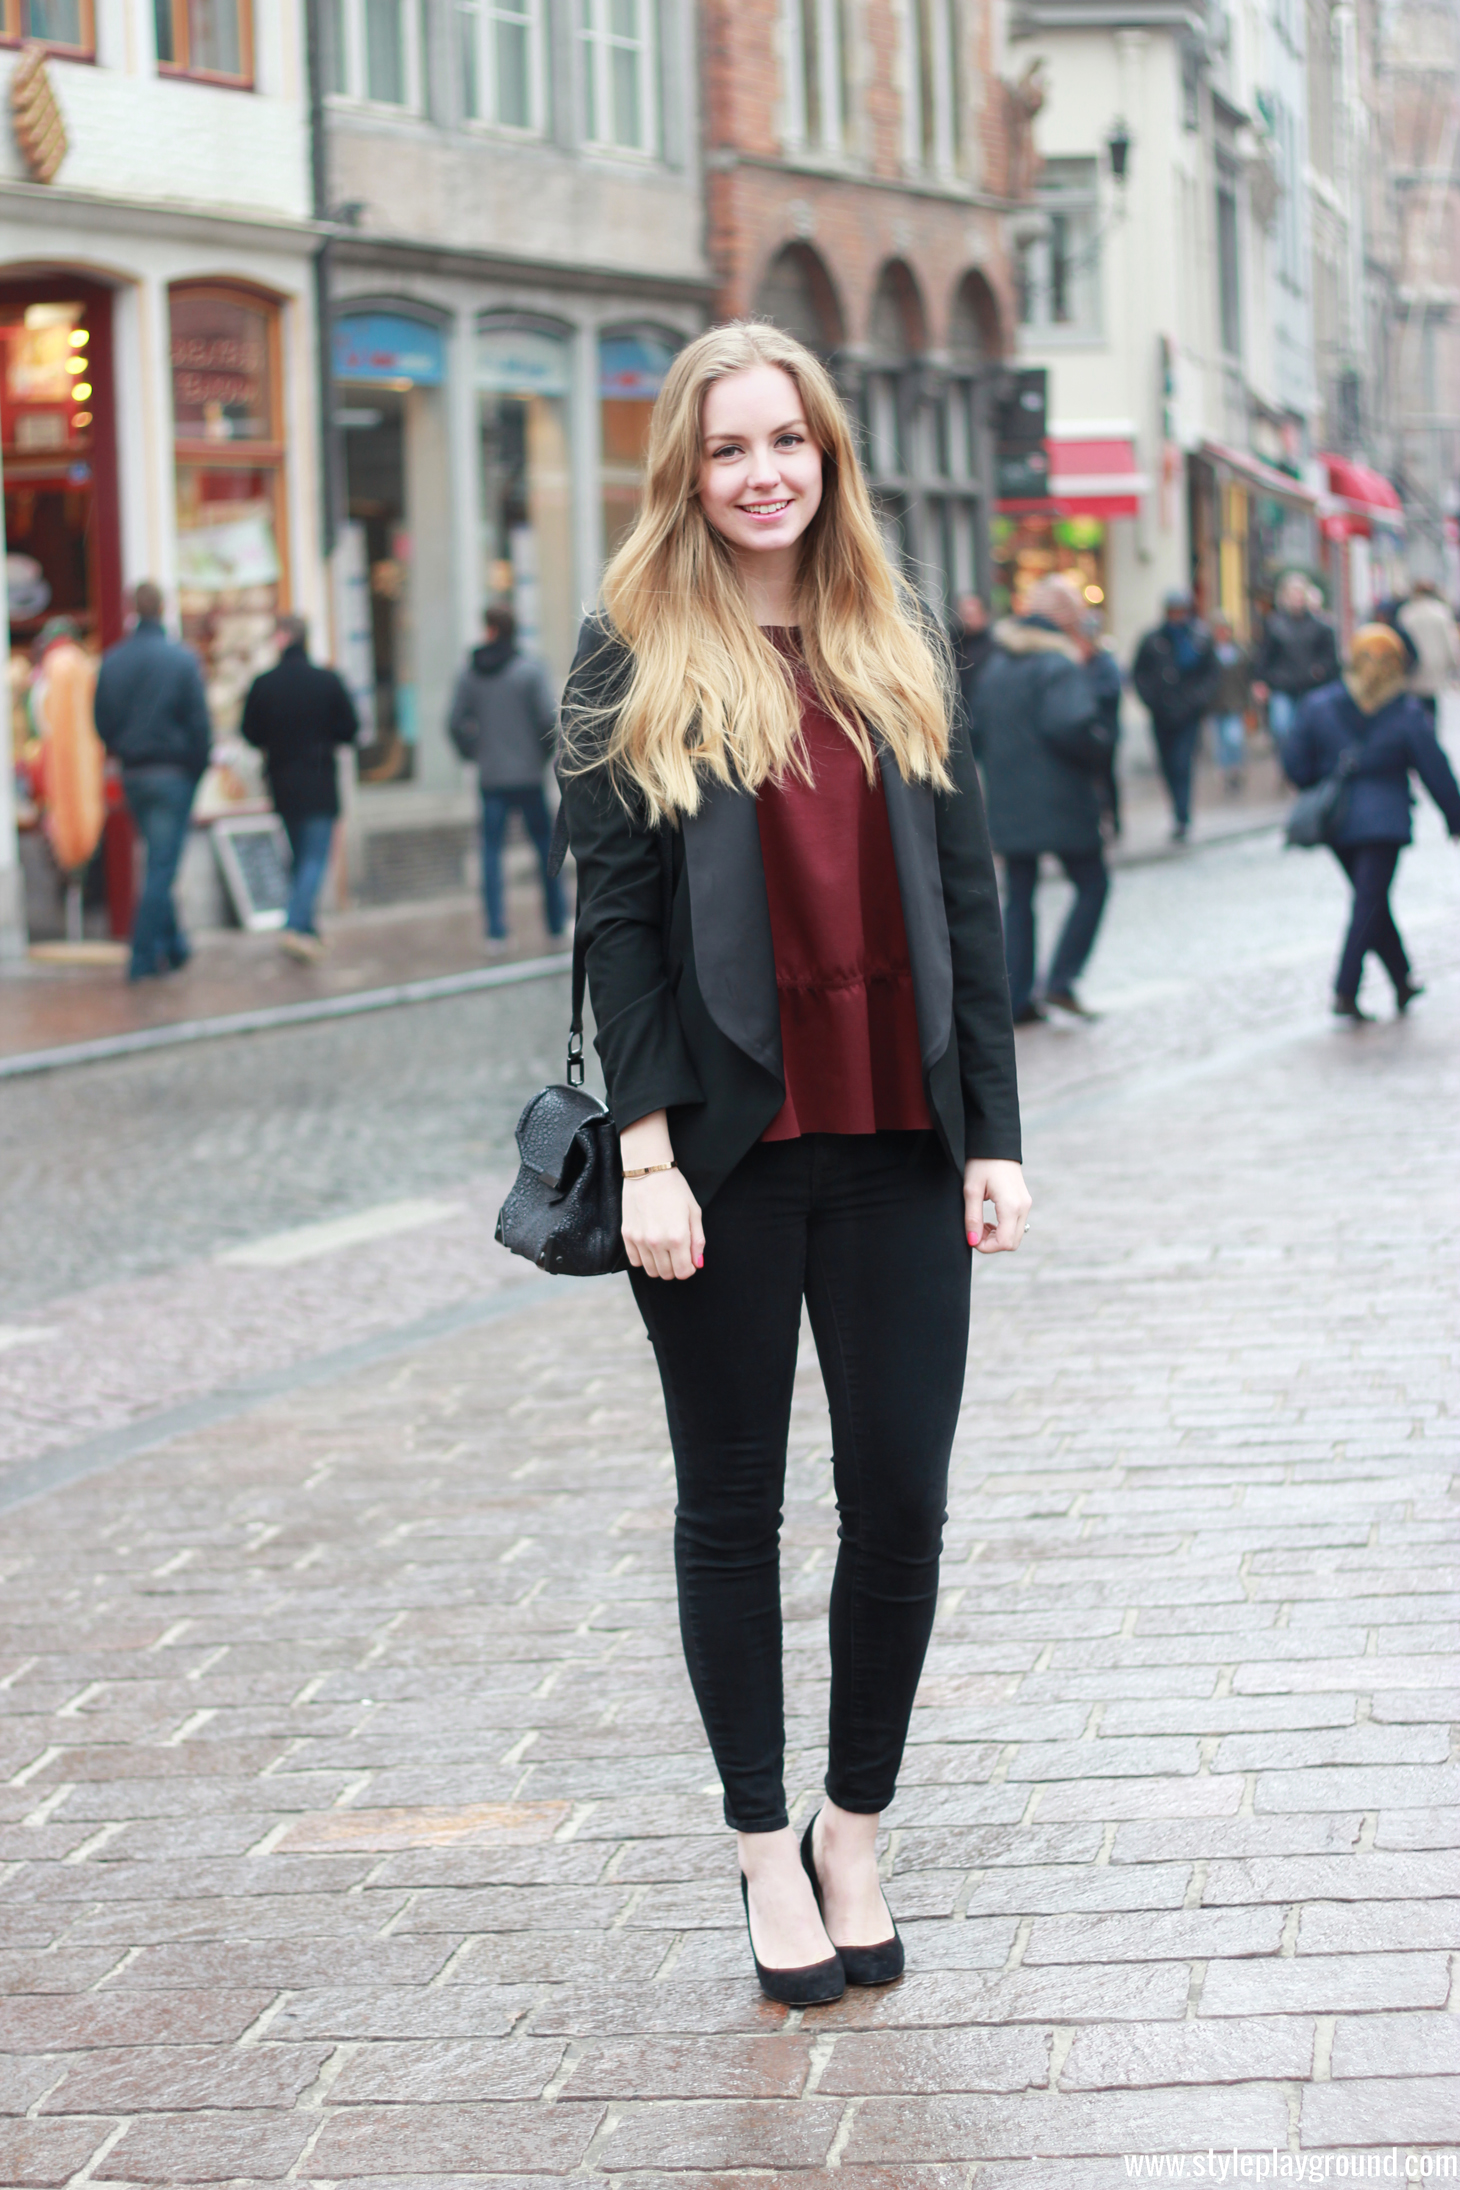 Axelle Blanpain from Style playground is wearing an H&M top, Michael Kors blazer, J Brand skinny jeans, J crew pumps & Alexander Wang bag 